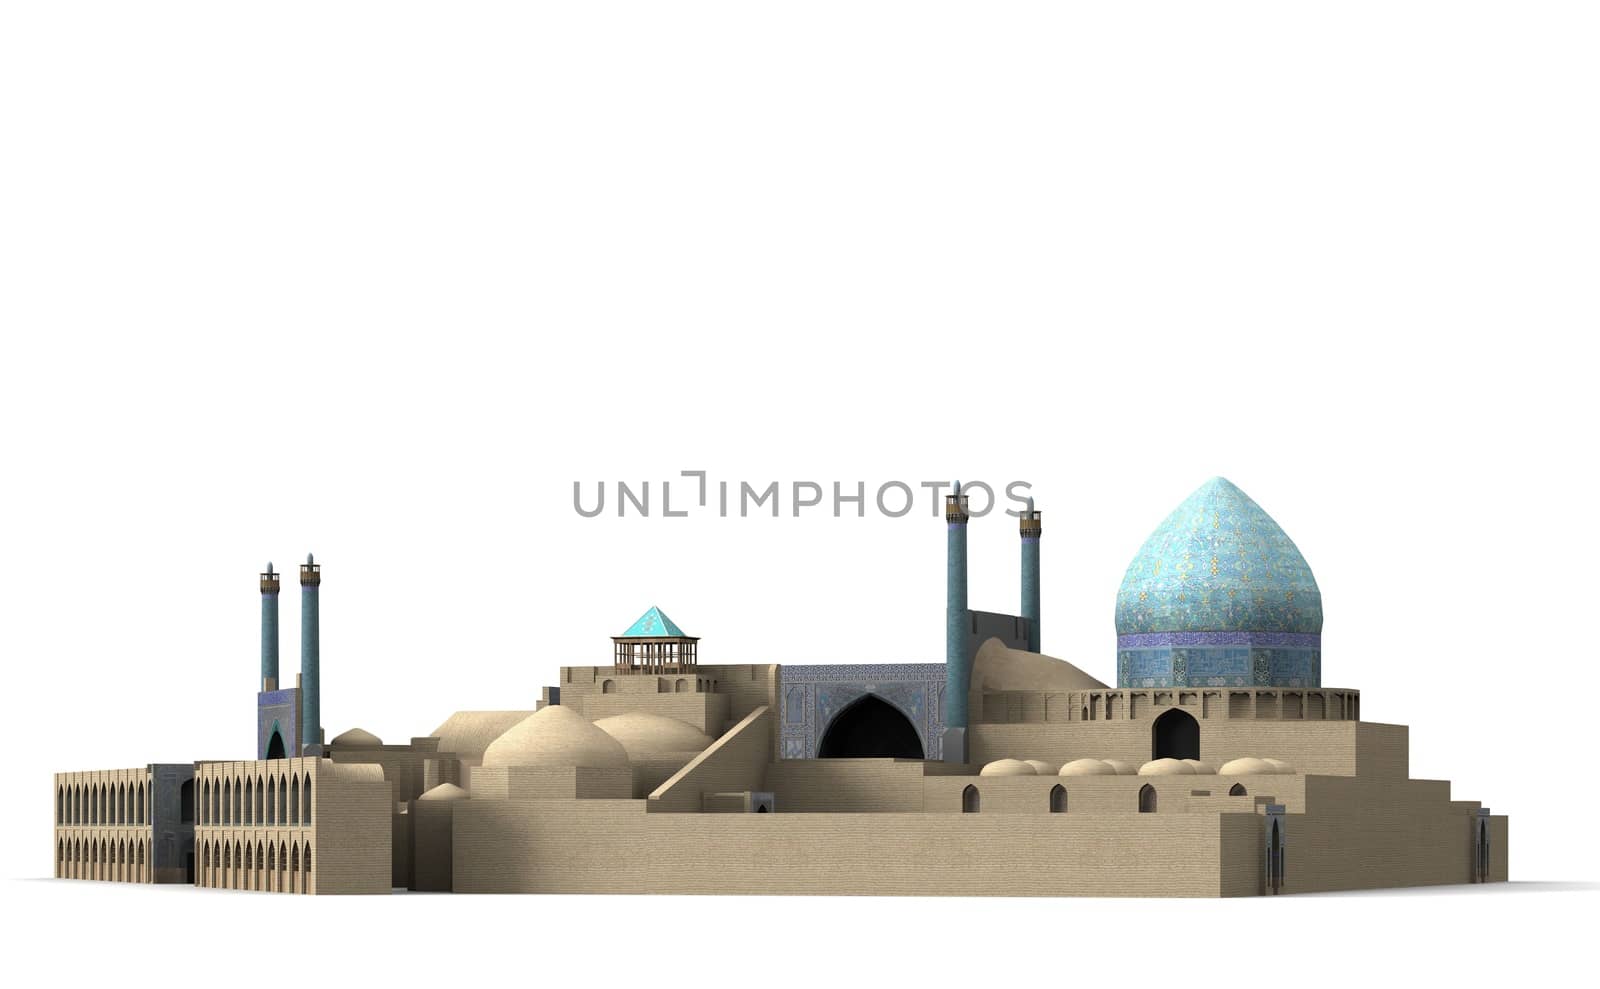 Meidan-e Em��m, in the historic center of the city of Isfahan